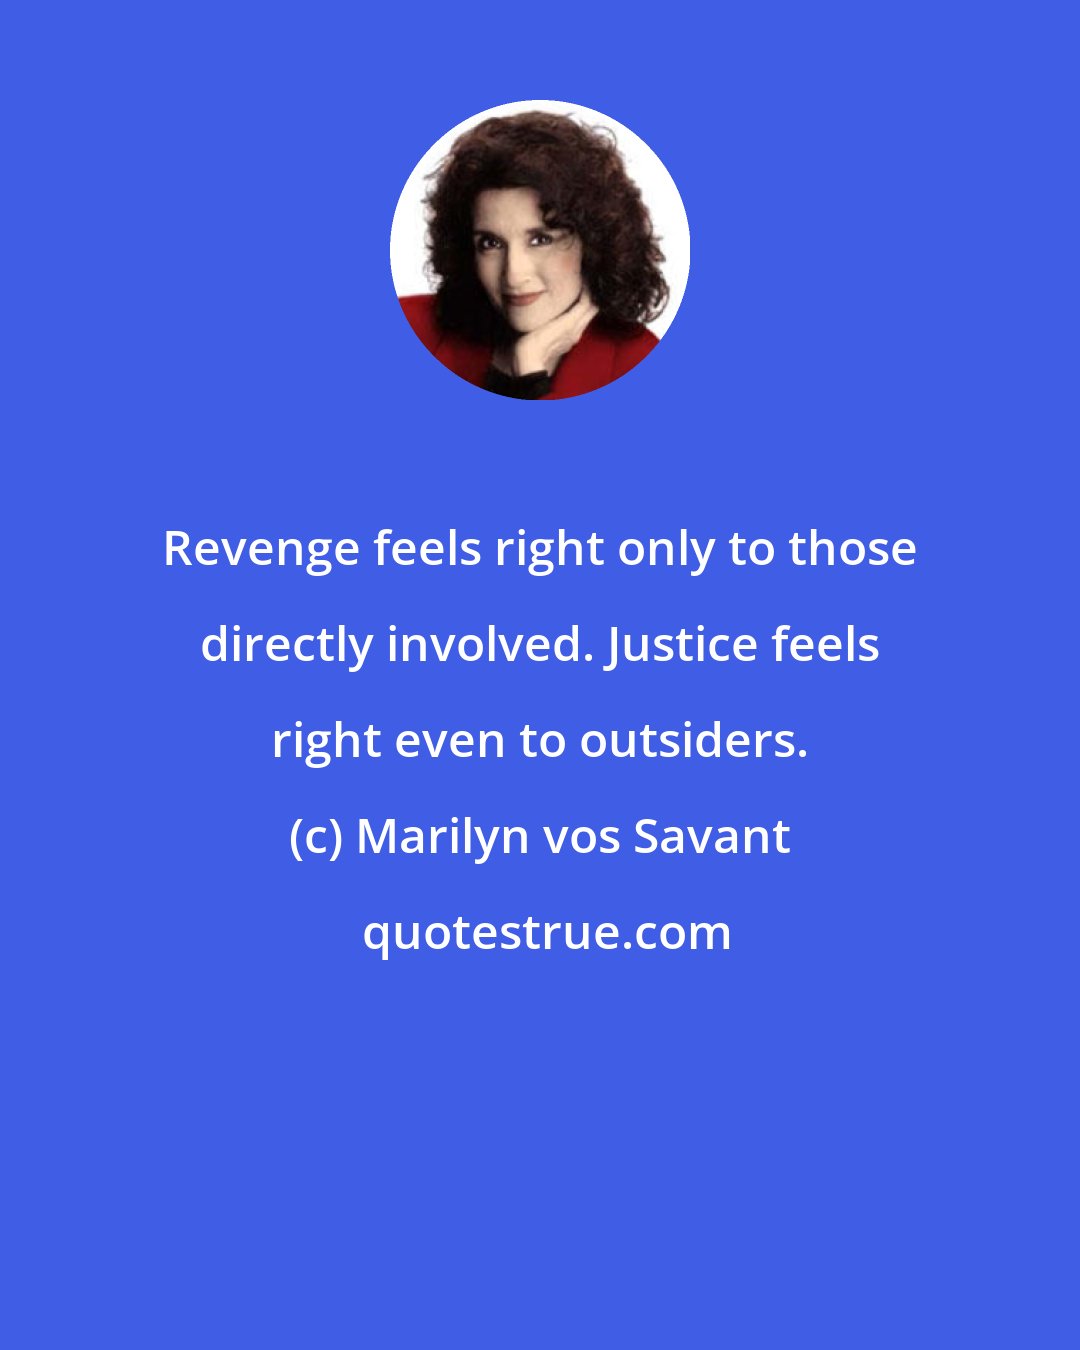 Marilyn vos Savant: Revenge feels right only to those directly involved. Justice feels right even to outsiders.